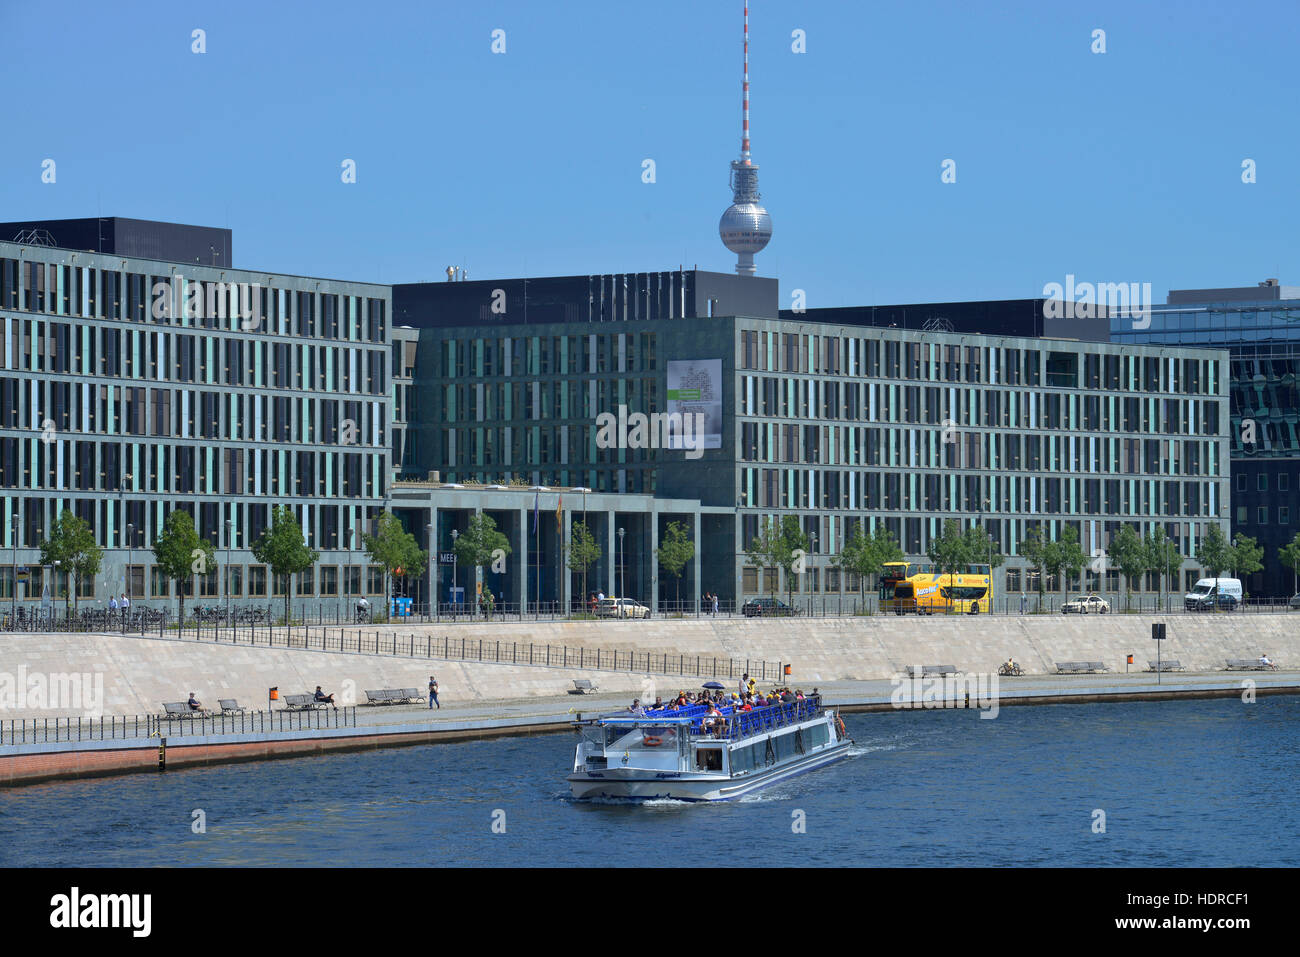 Page 2 - Bildung High Resolution Stock Photography and Images - Alamy